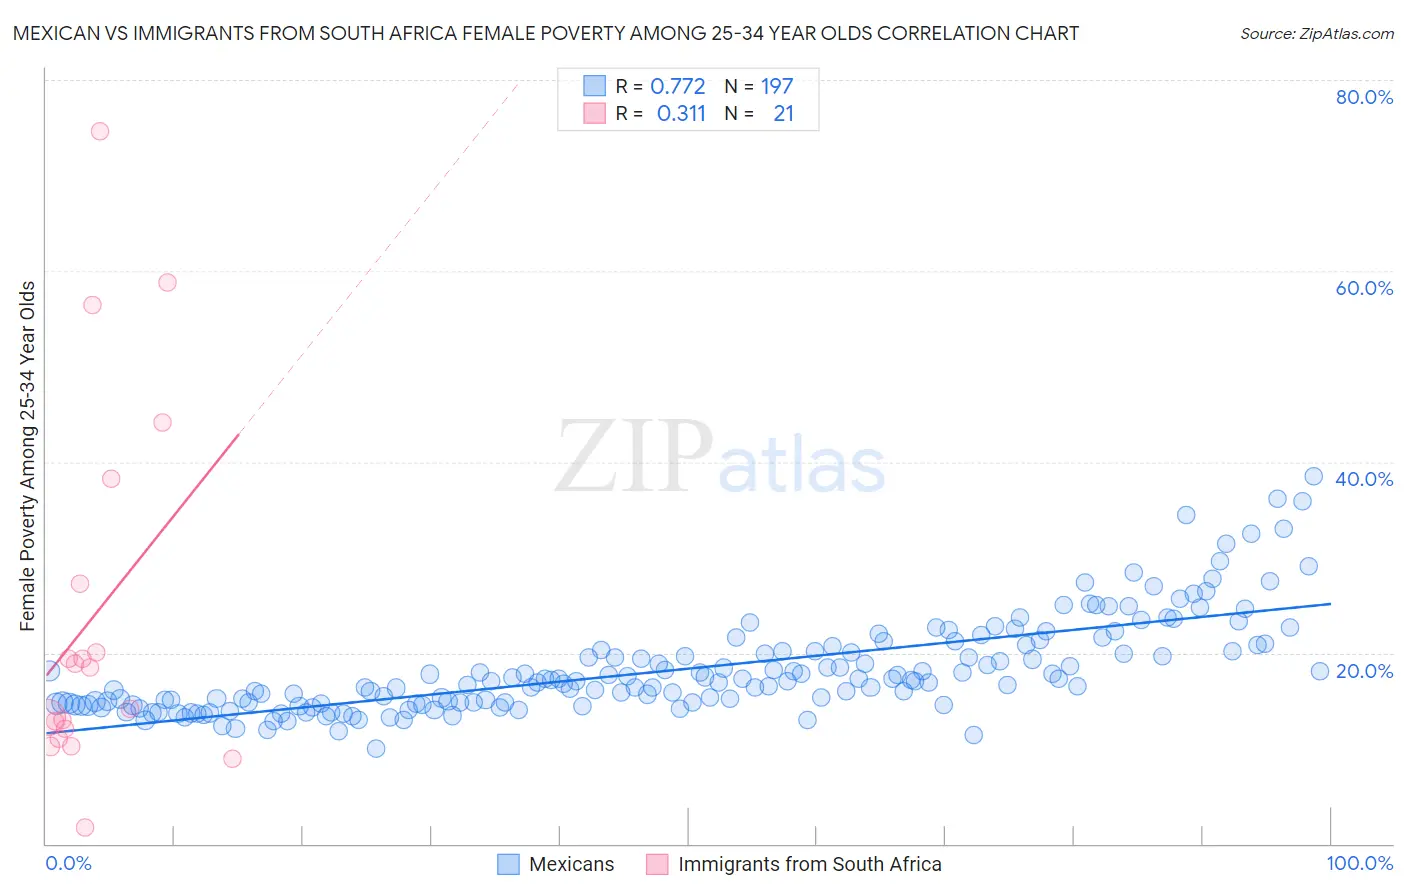 Mexican vs Immigrants from South Africa Female Poverty Among 25-34 Year Olds